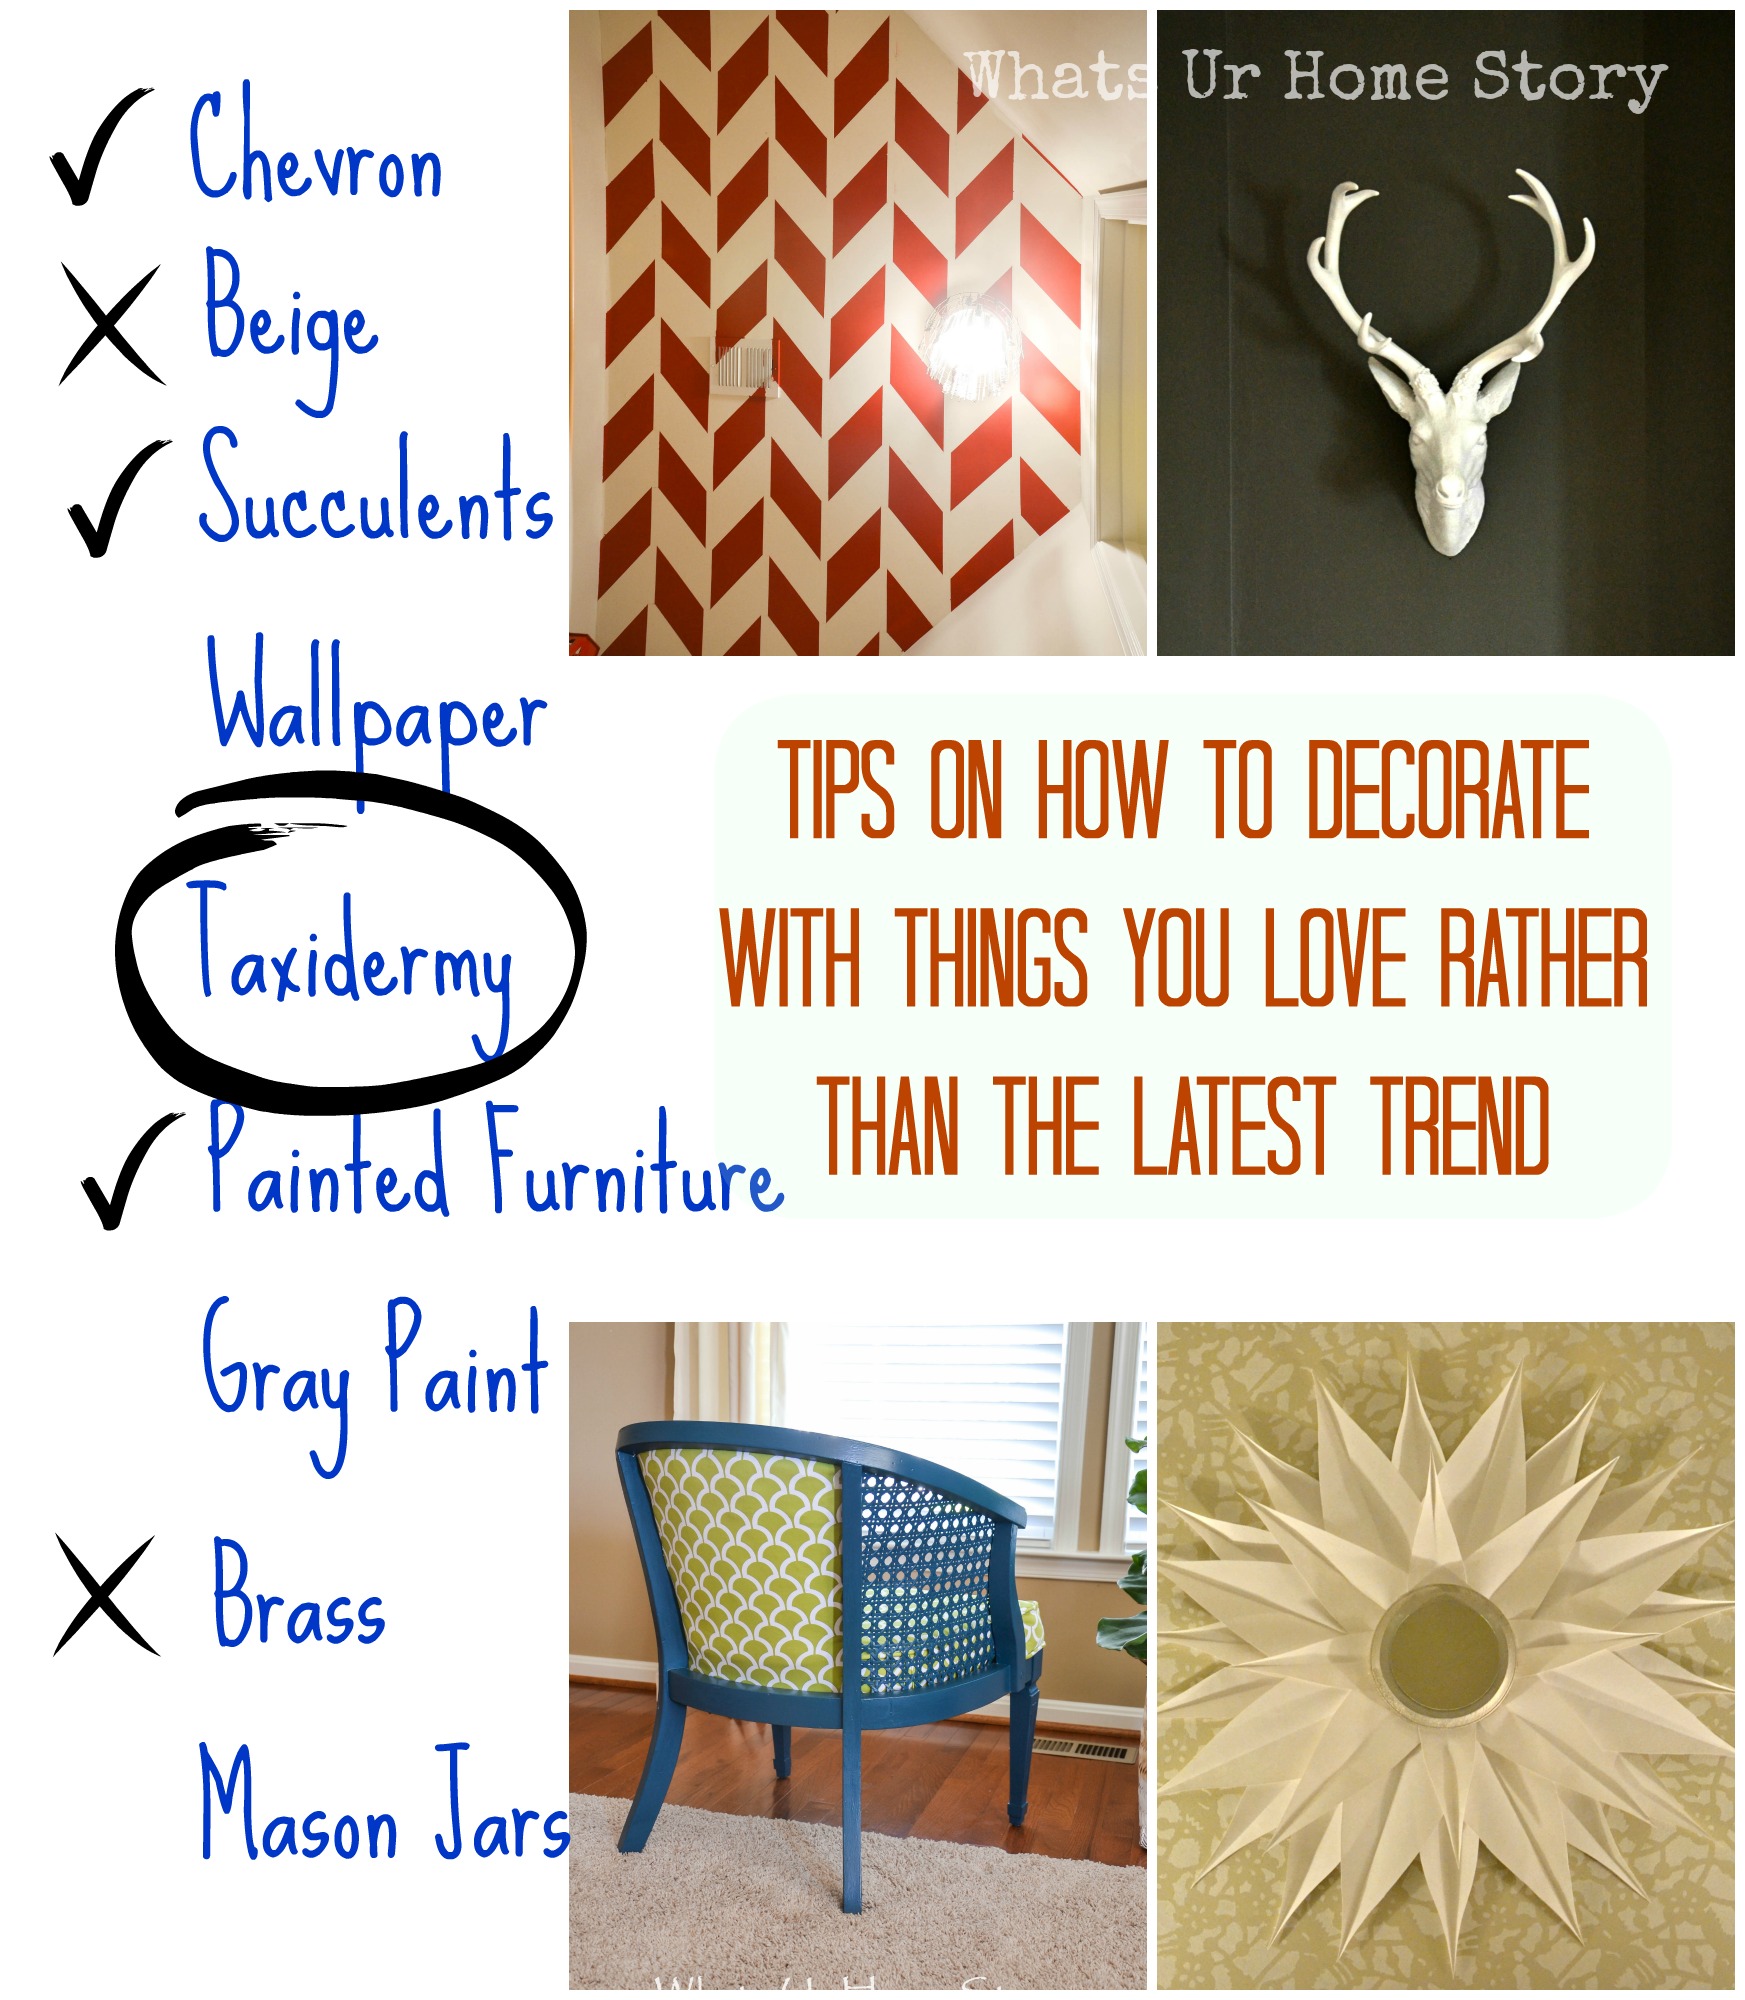 How Trendy are You? Should you follow decorating trends?